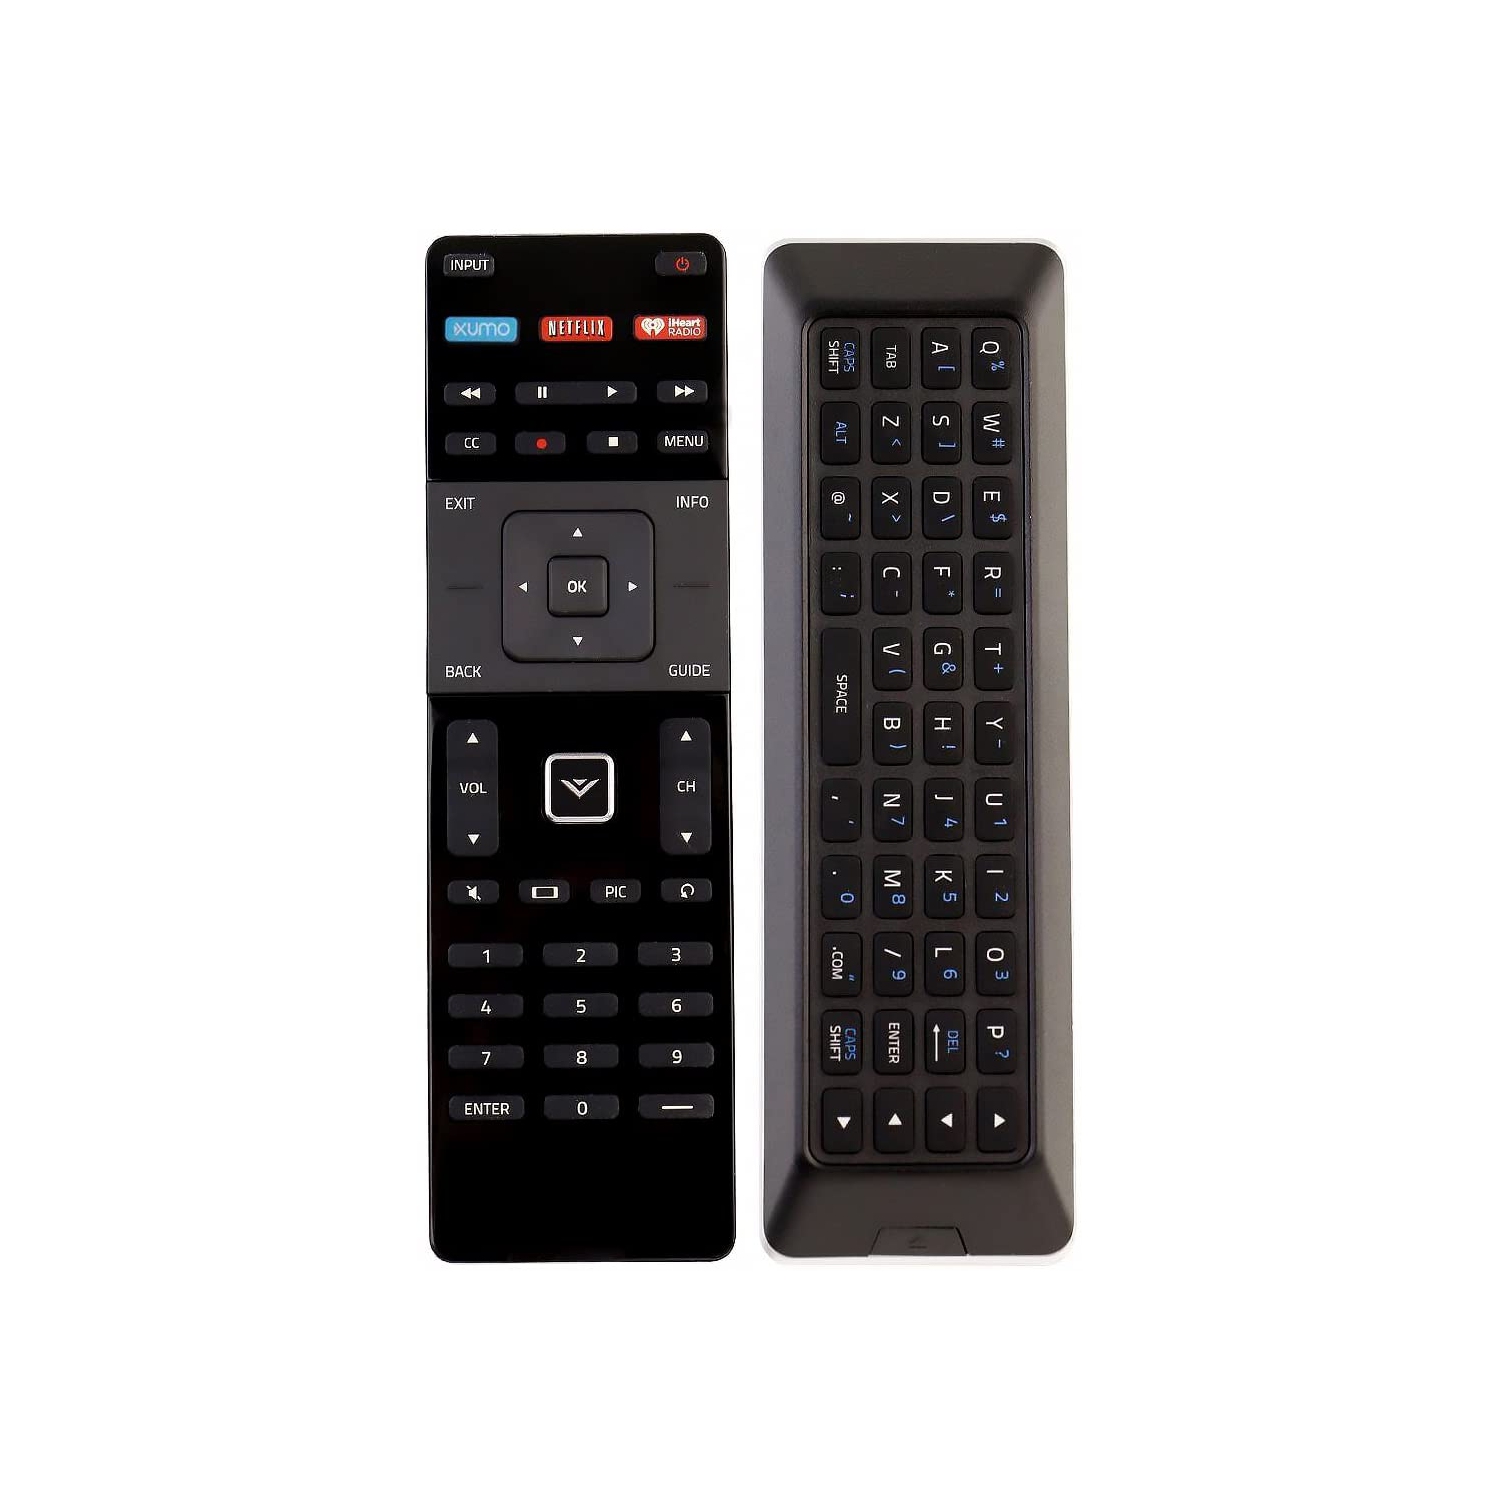 New XRT500 LED HDTV Remote Control with QWERTY keyboard for Vizio TV M43-C1 M49-C1 M50-C1 M55-C2 M60-C3 M65-C1 M70-C3